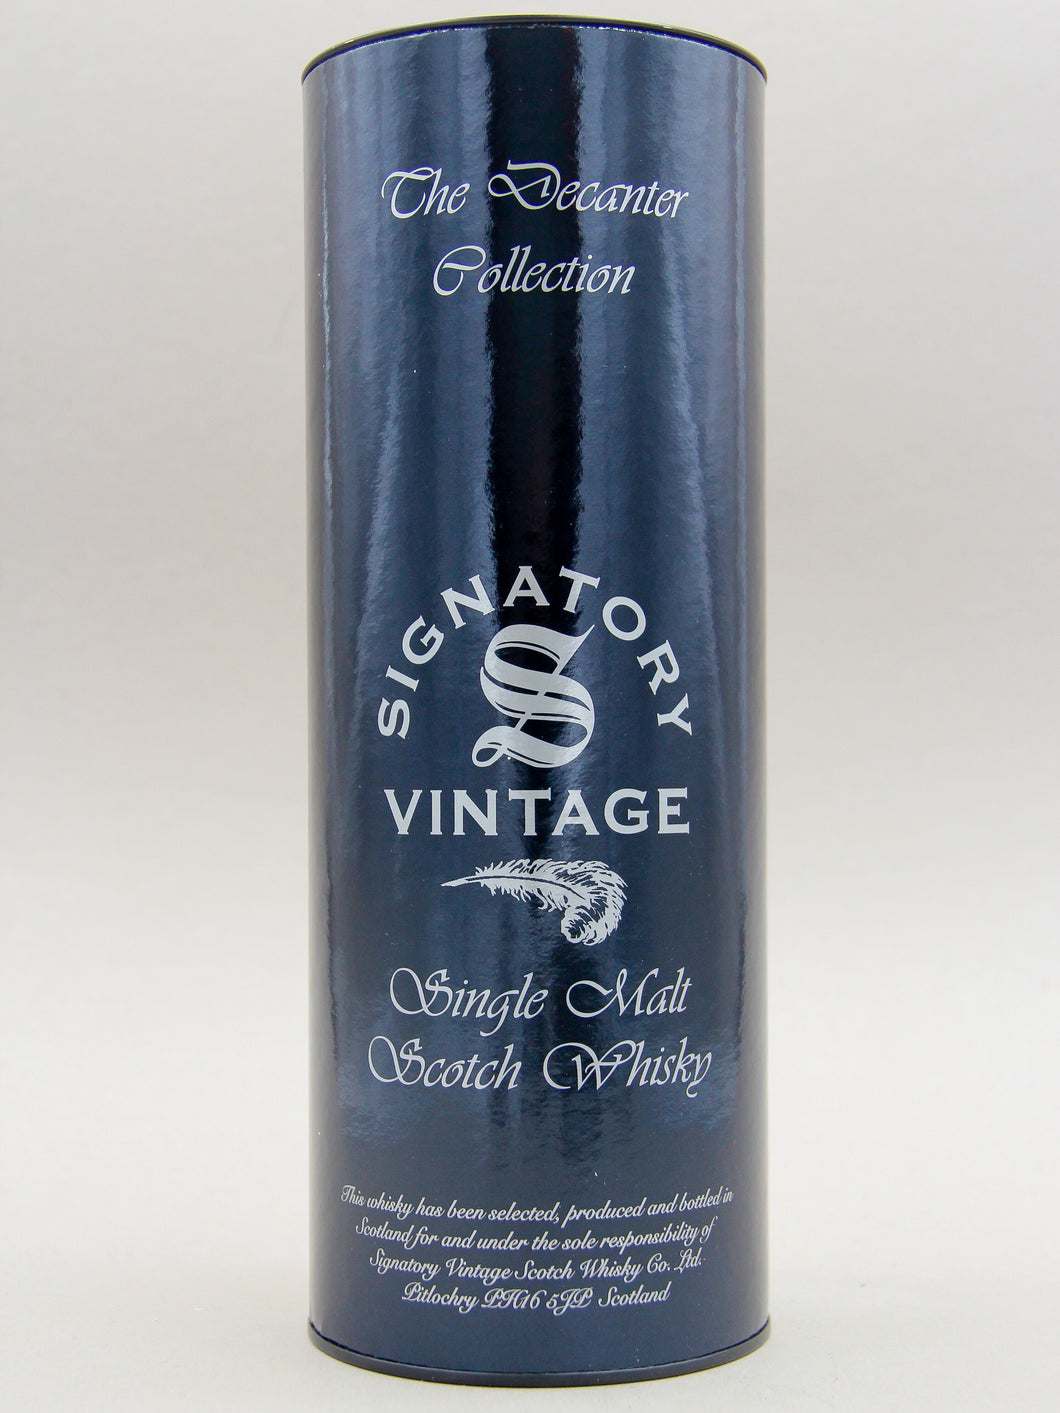 Signatory Vintage, Ben Nevis, 2014-2022, The Decanter Collection, Aged 8 years, Oloroso Sherry Butts, Highland Single Malt Scotch Whisky (46%, 70cl)